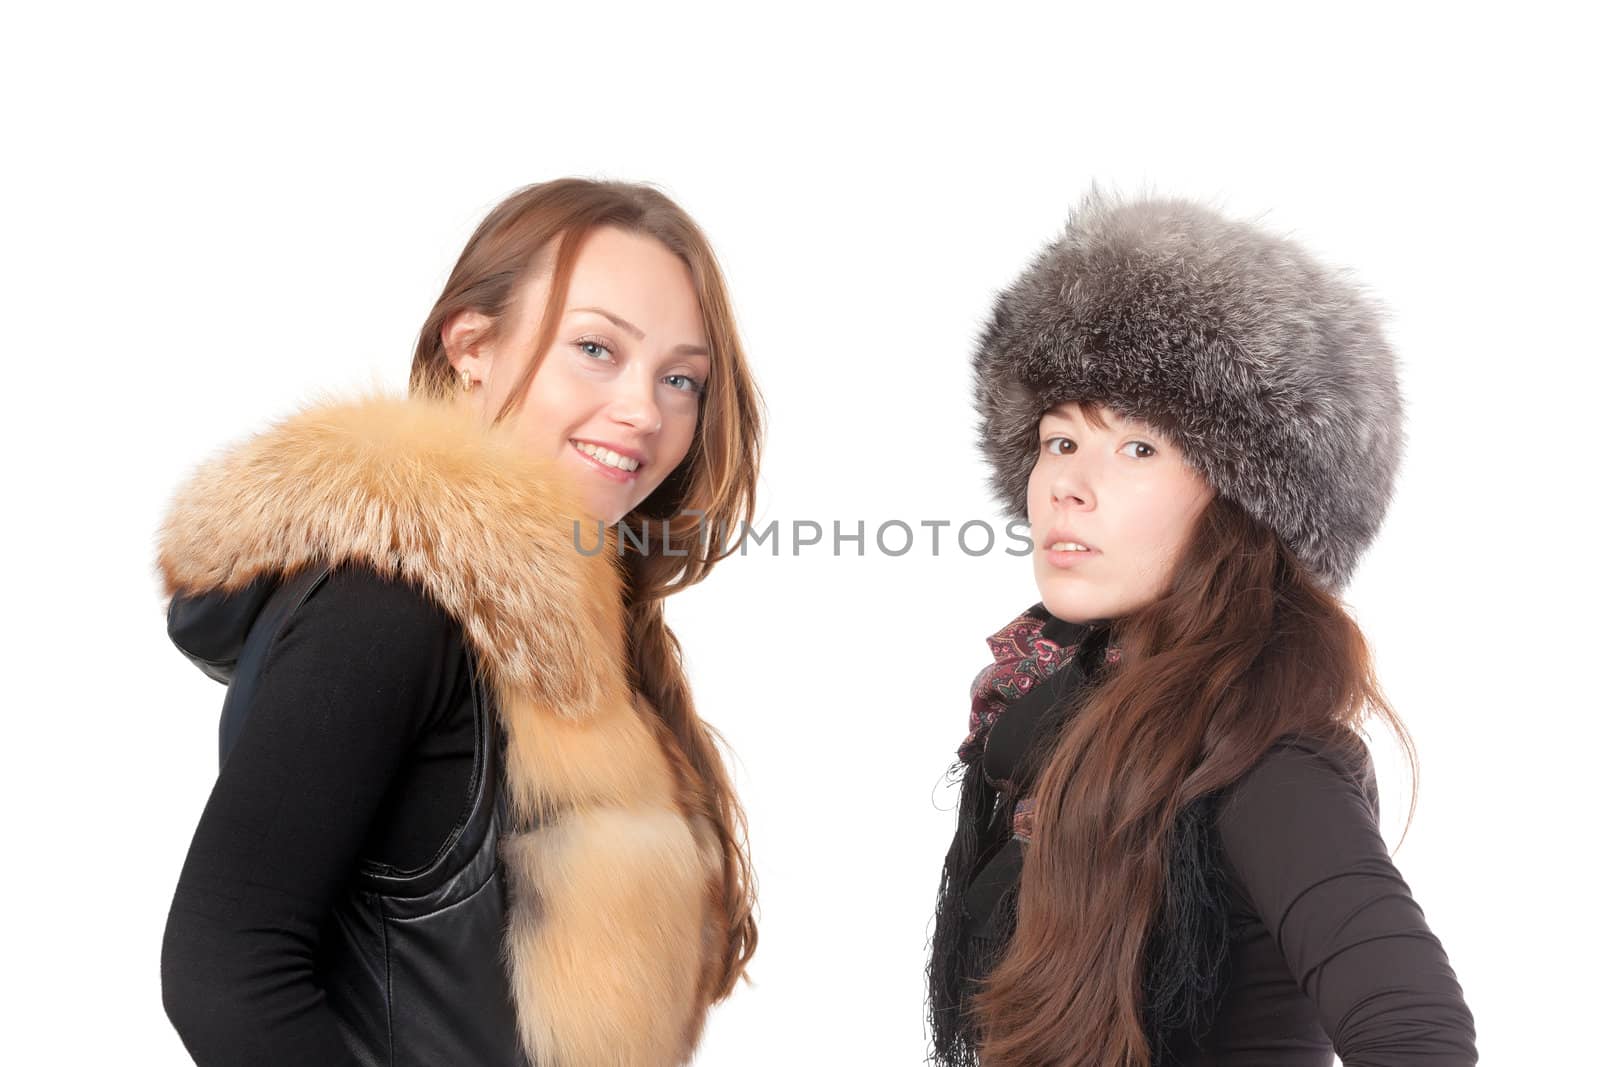 Two attractive women dressed for winter posing together on a white background in fur trimmed garments